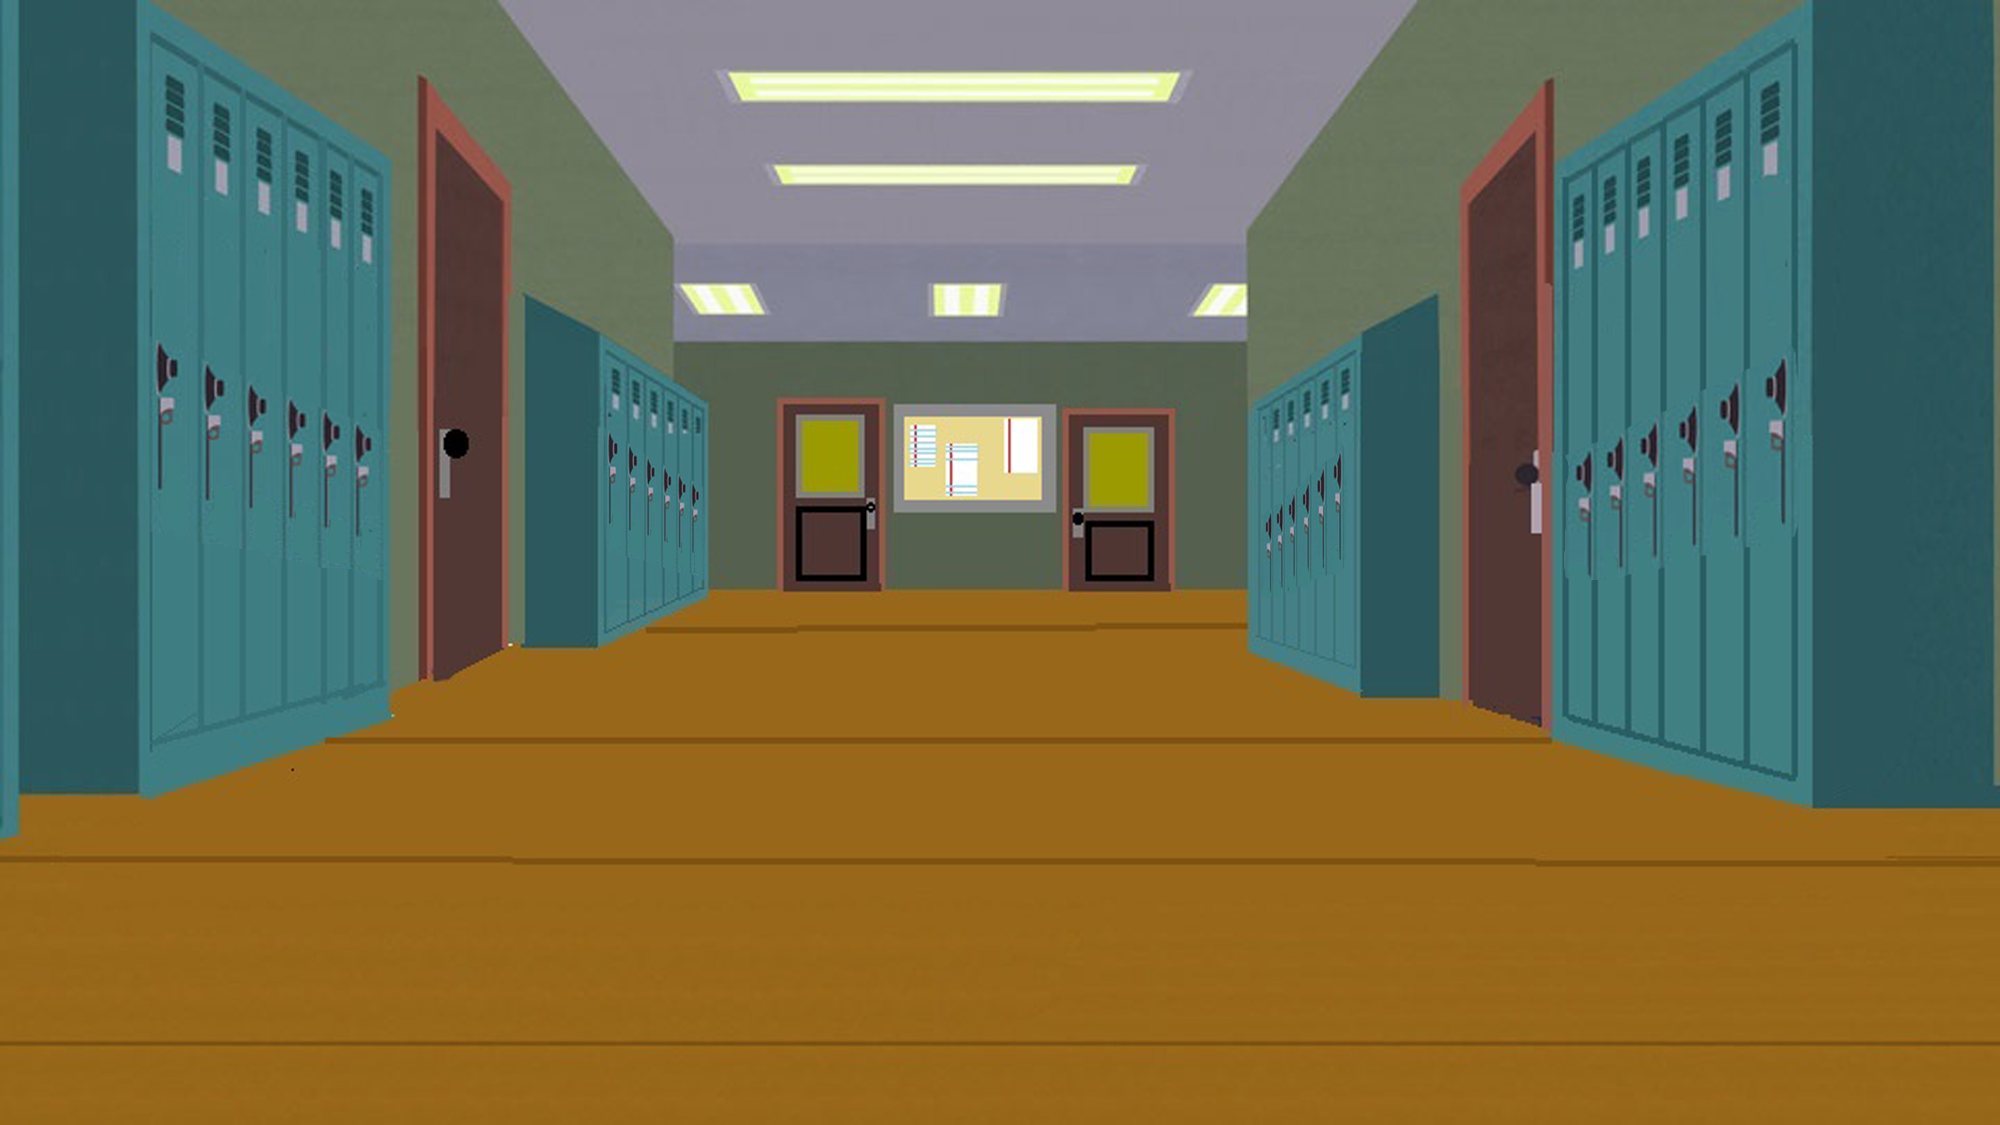 South Park Elementary / Homepage